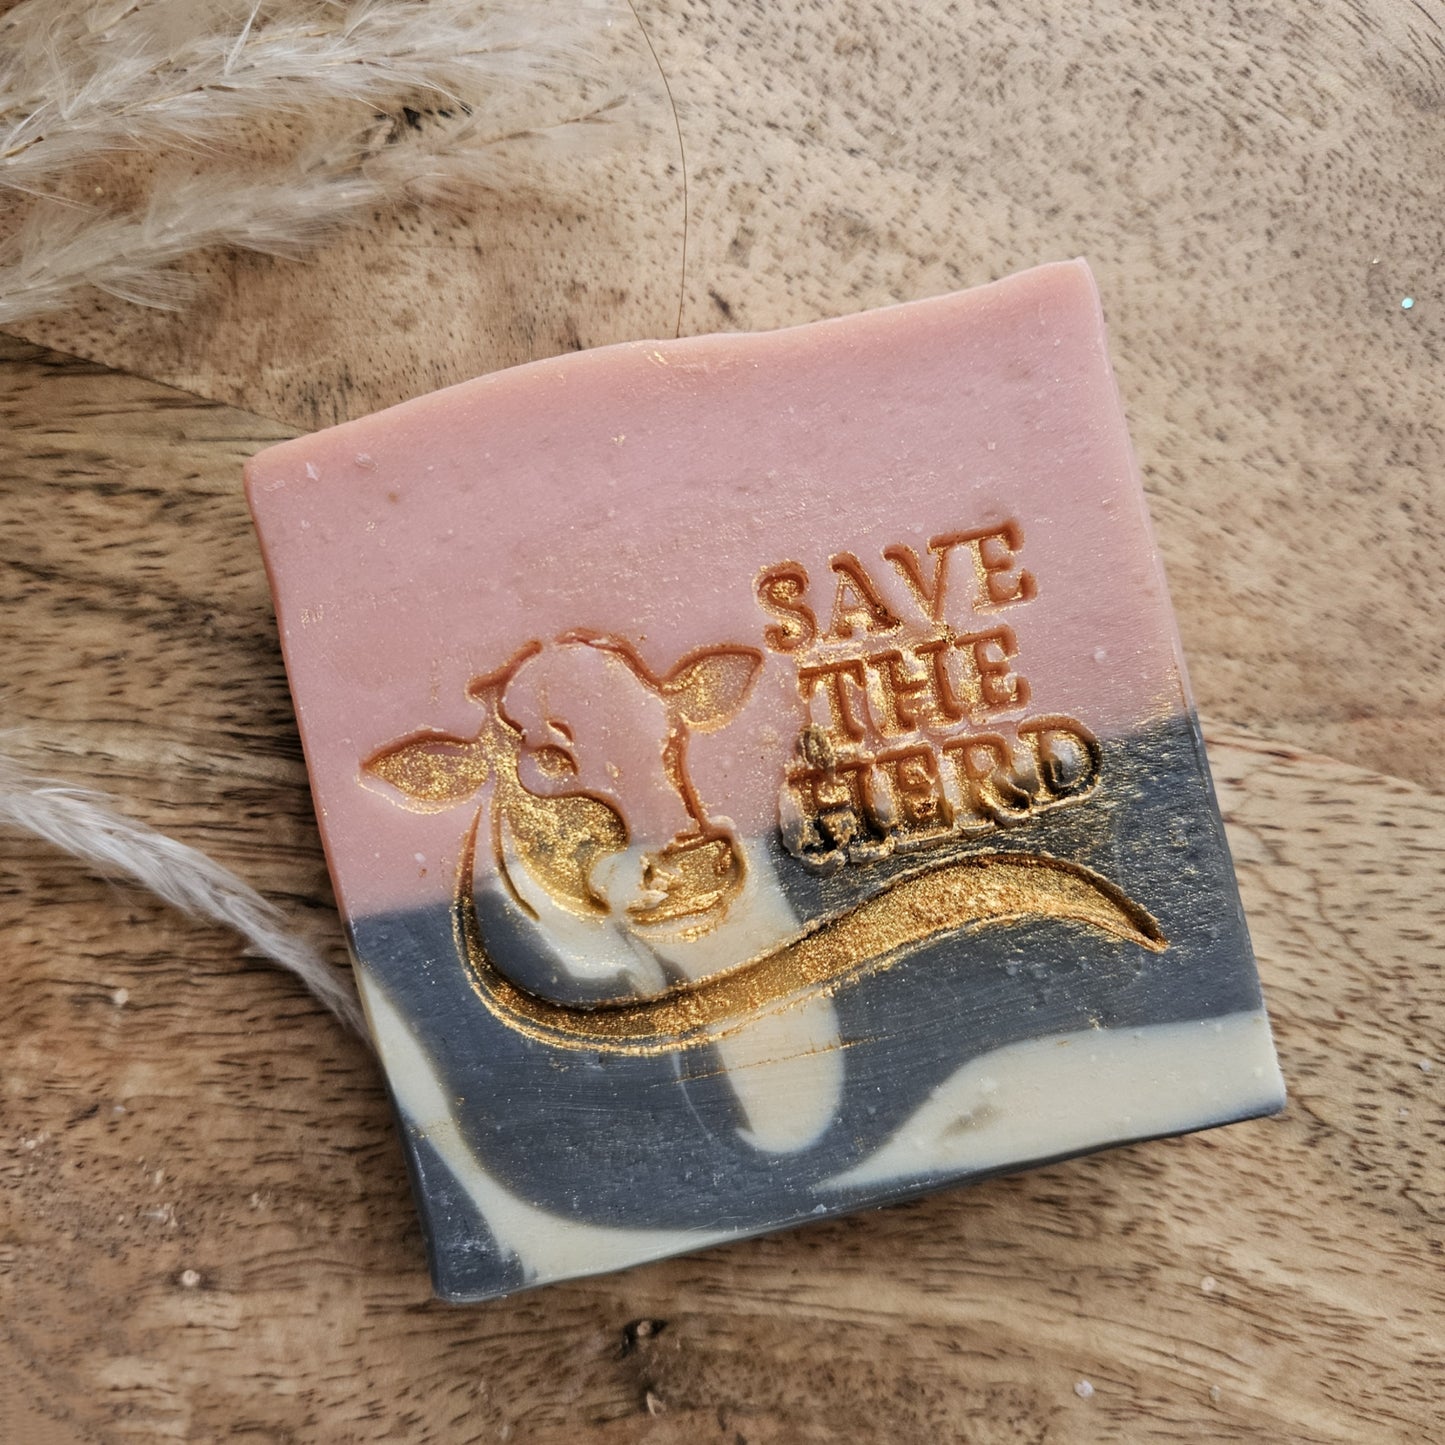 "Save the Herd!" - Cow Milk Soaps